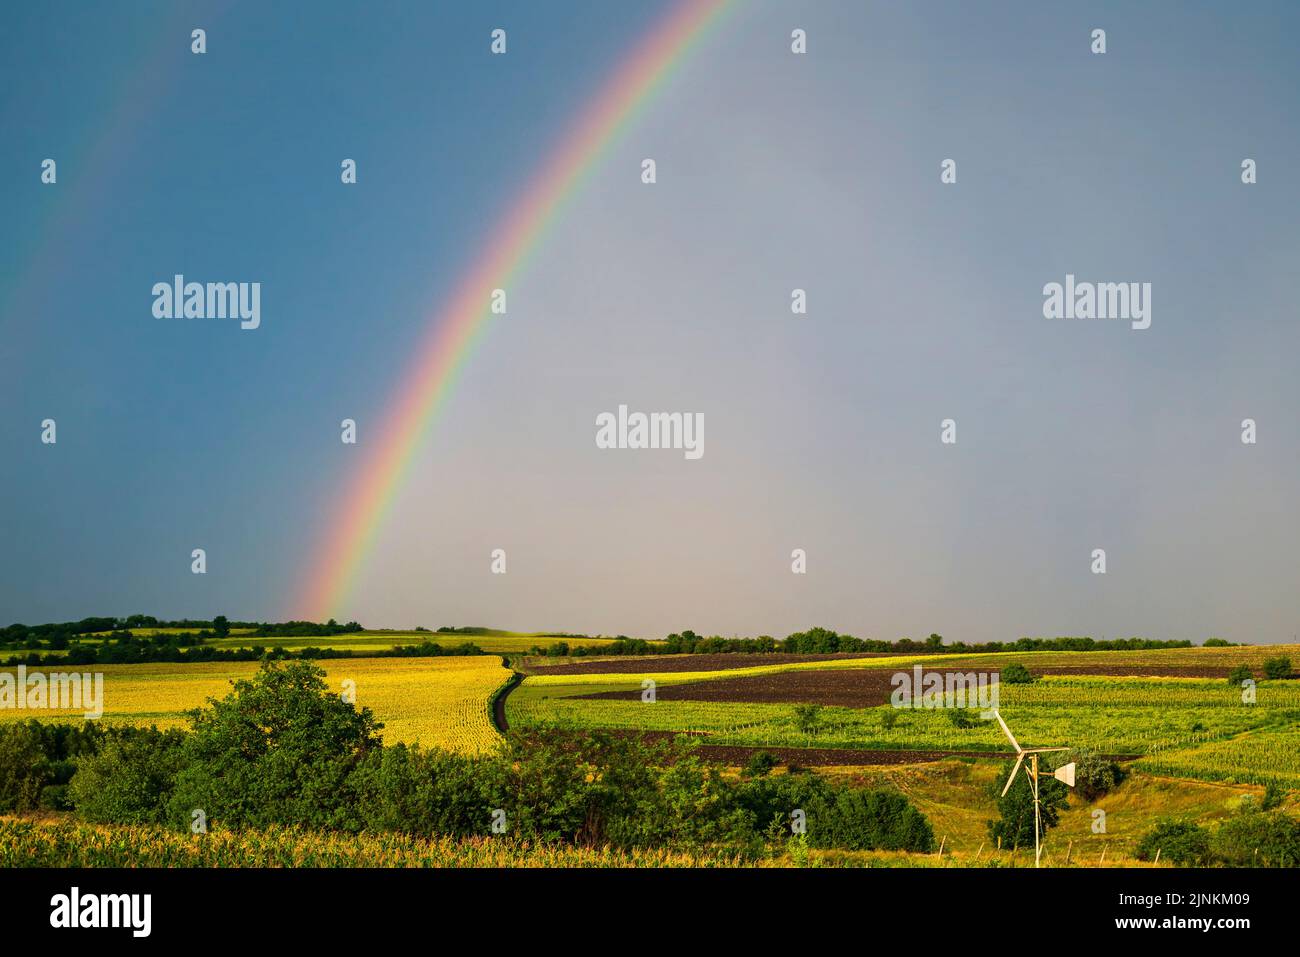 Rainbow over stormy sky. Rural landscape with rainbow over dark stormy sky in a countryside at summer day. Stock Photo